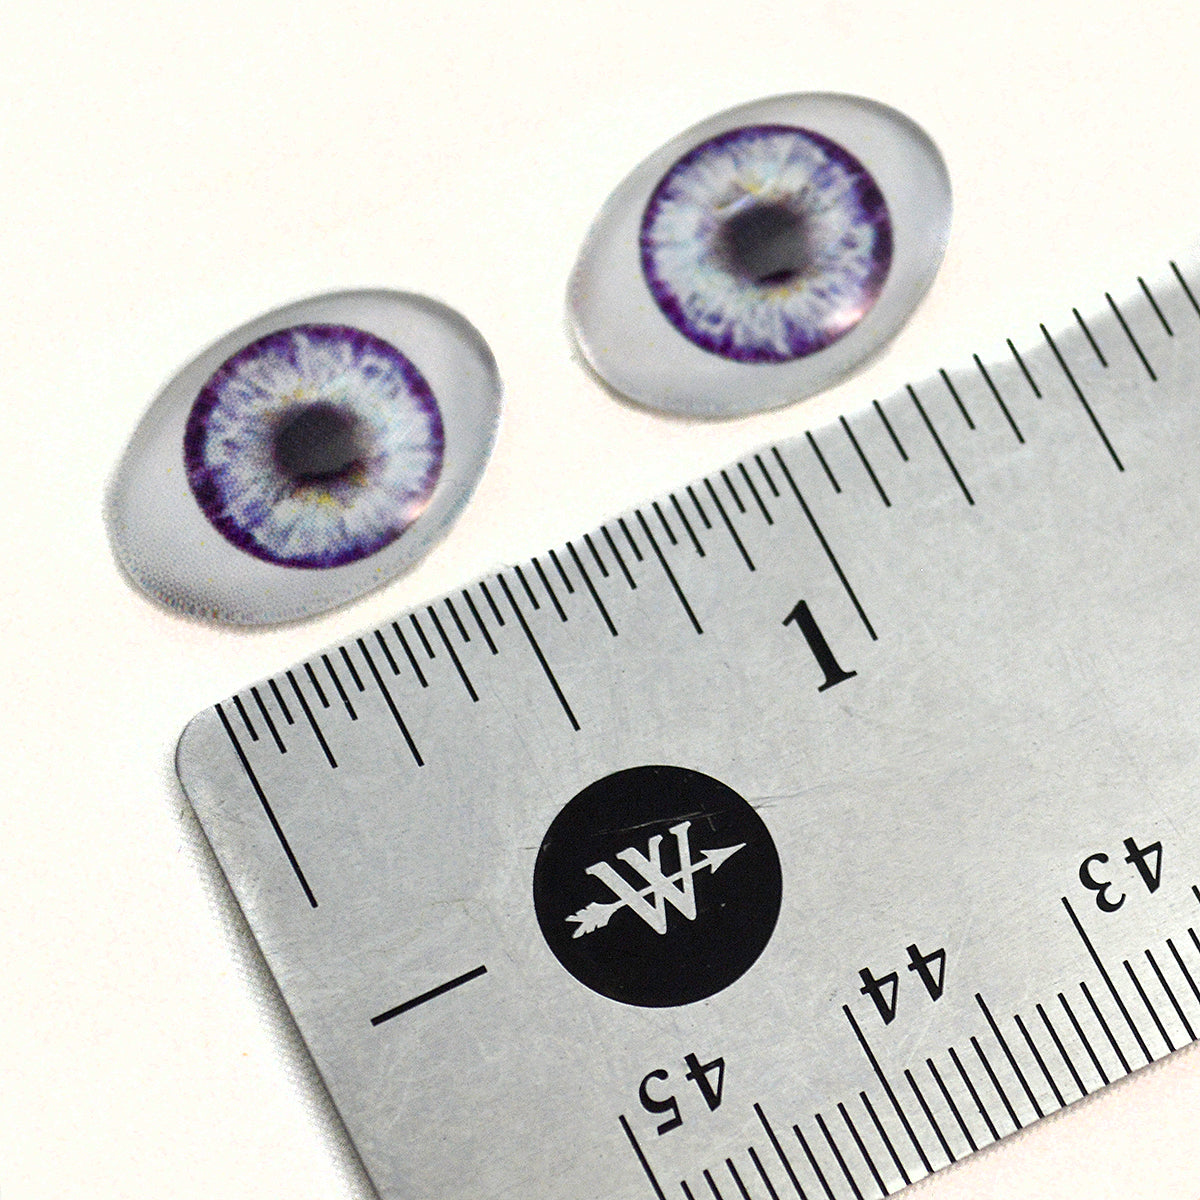 12mm Lavender Round “Real Eyes” Made In USA 